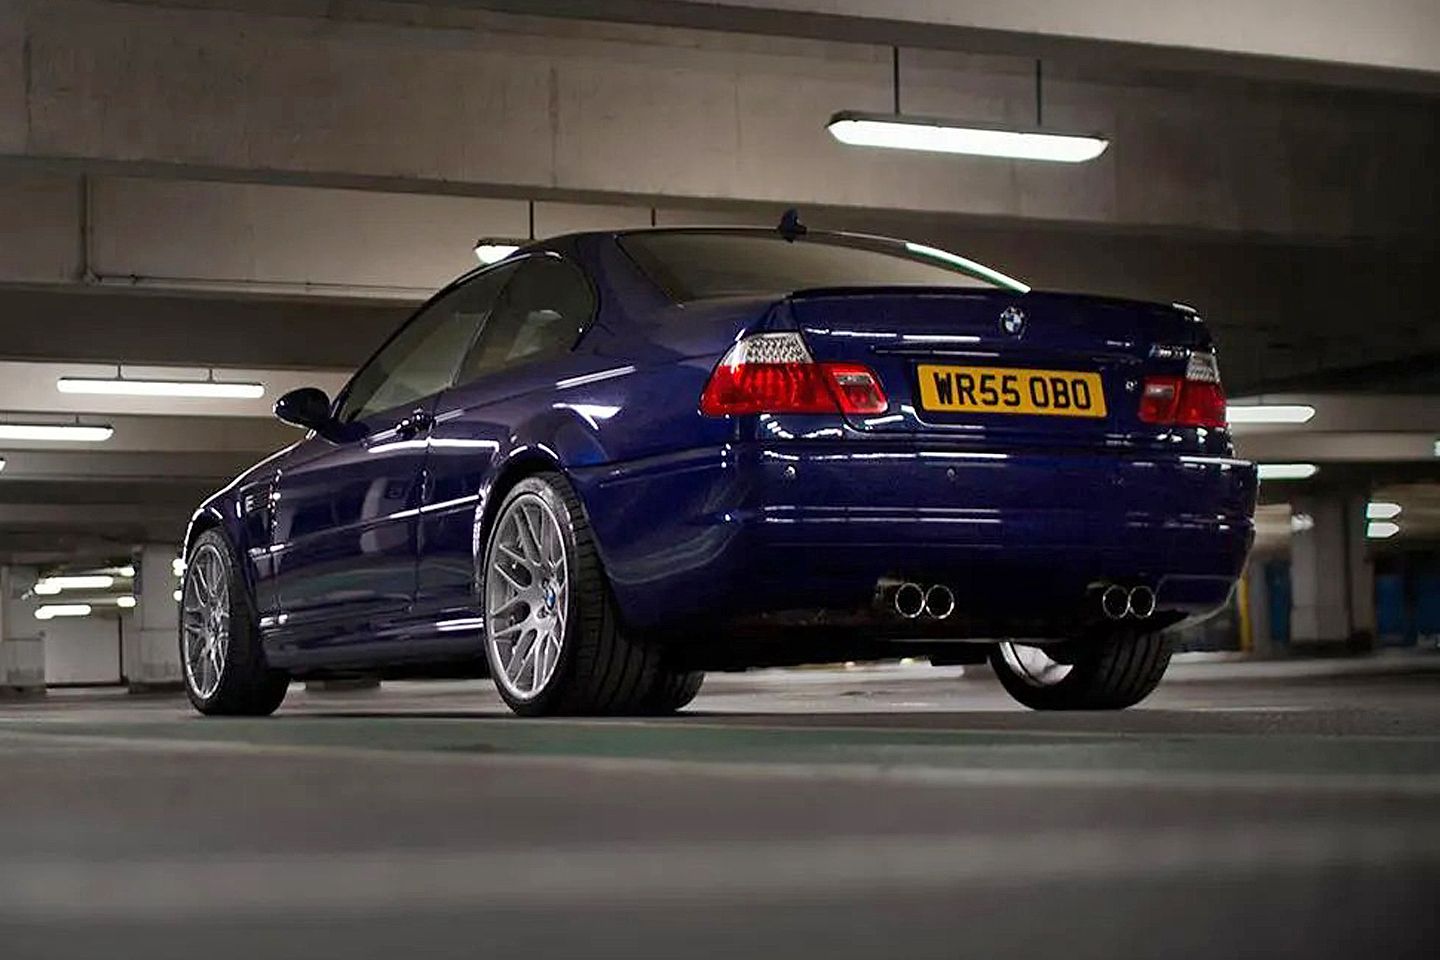 A BMW M3 E46 Just Sold For $90,000, Will This Become The New Normal?